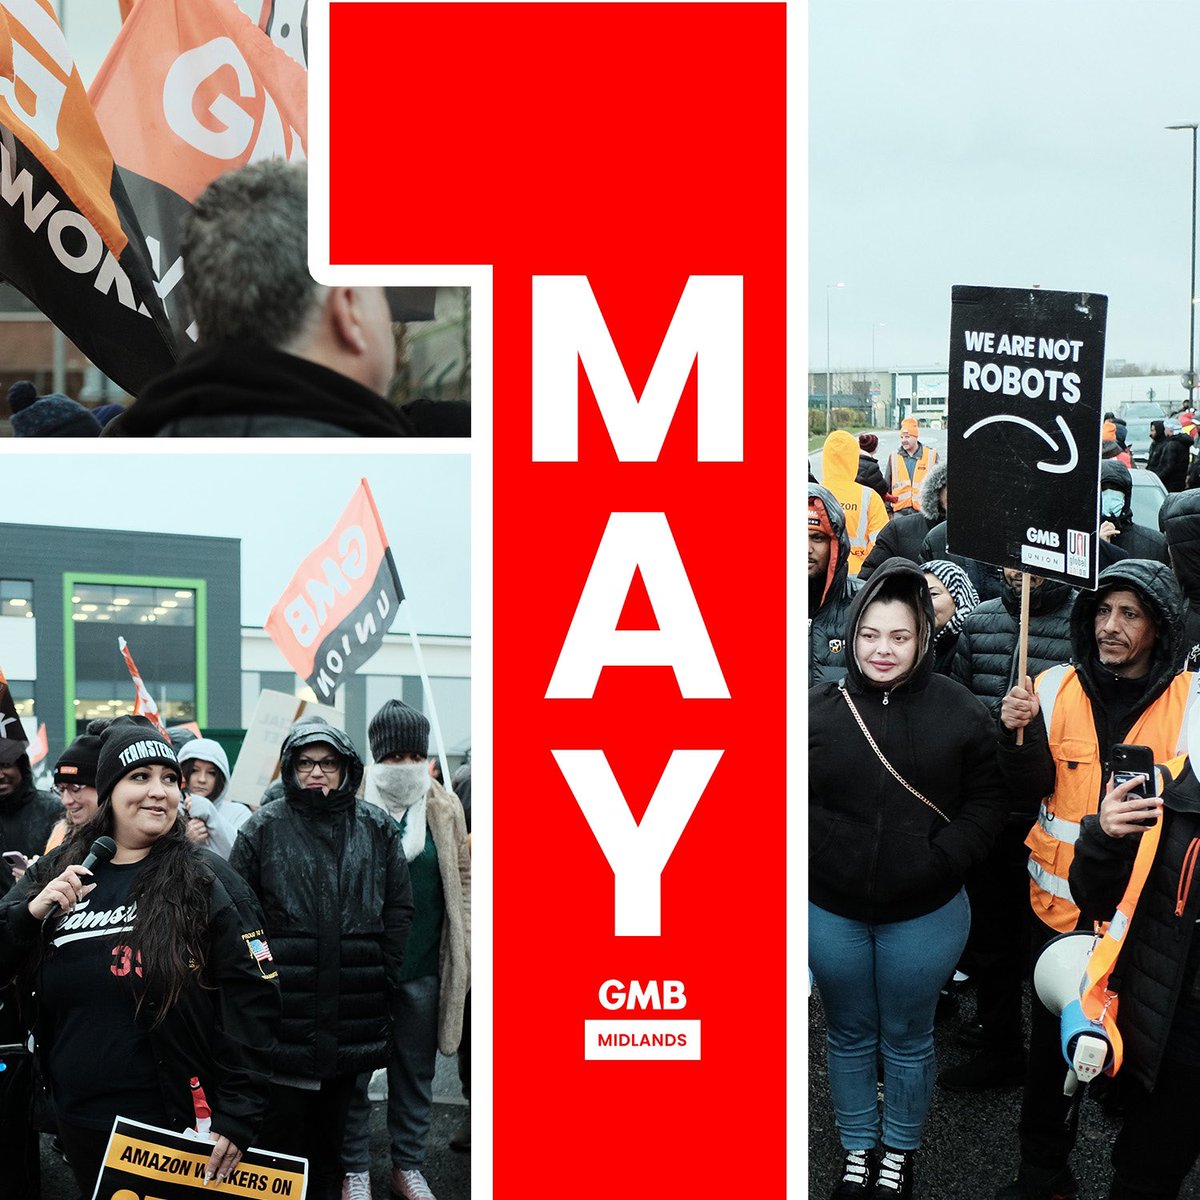 May day is the worker’s day 🌹 Organise your workplace in the GMB - gmb.org.uk/join